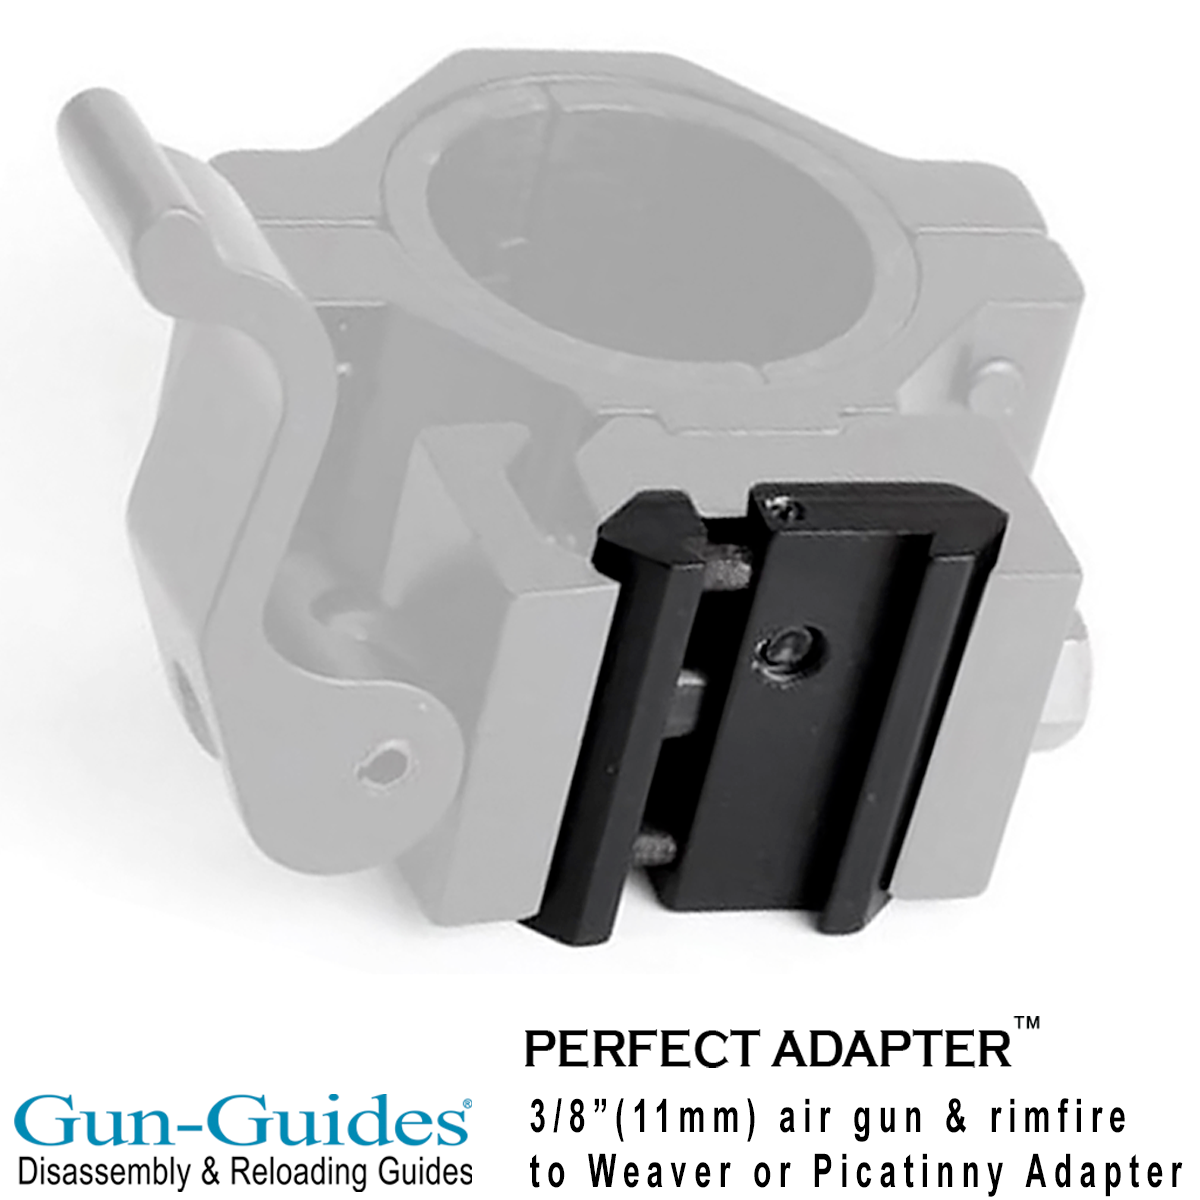 Perfect Adapter™ .22/Airgun (11mm) to Weaver/Picatinny Rail by Gun-Guides® - NEW!